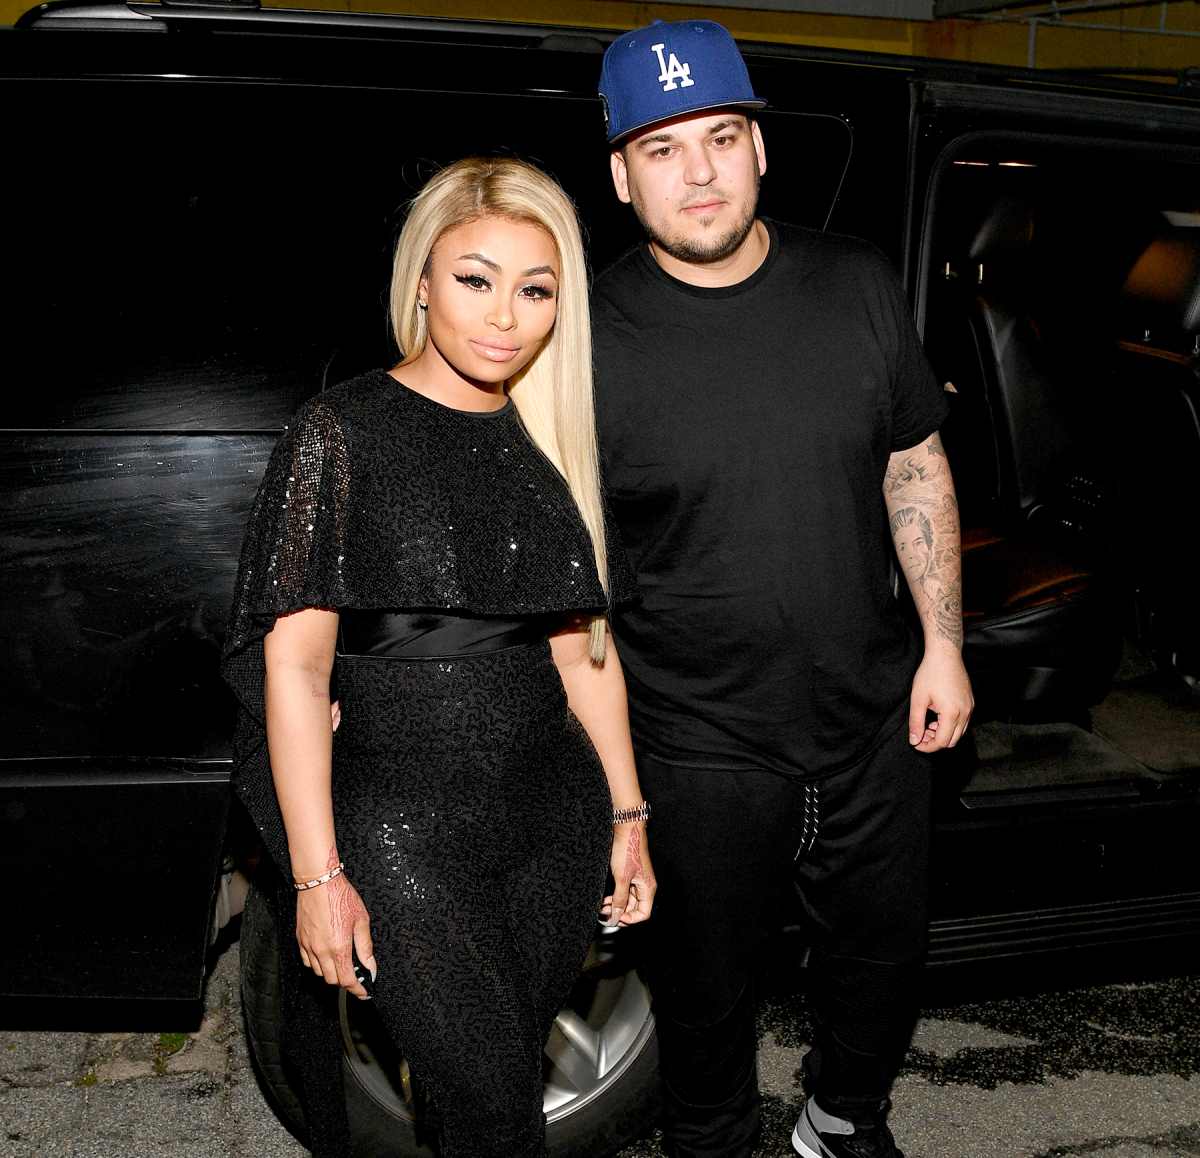 Candid Topless Beach Group - Rob Kardashian Could Face Jail Time for Posting Nude Photos of Blac Chyna,  Says Legal Expert